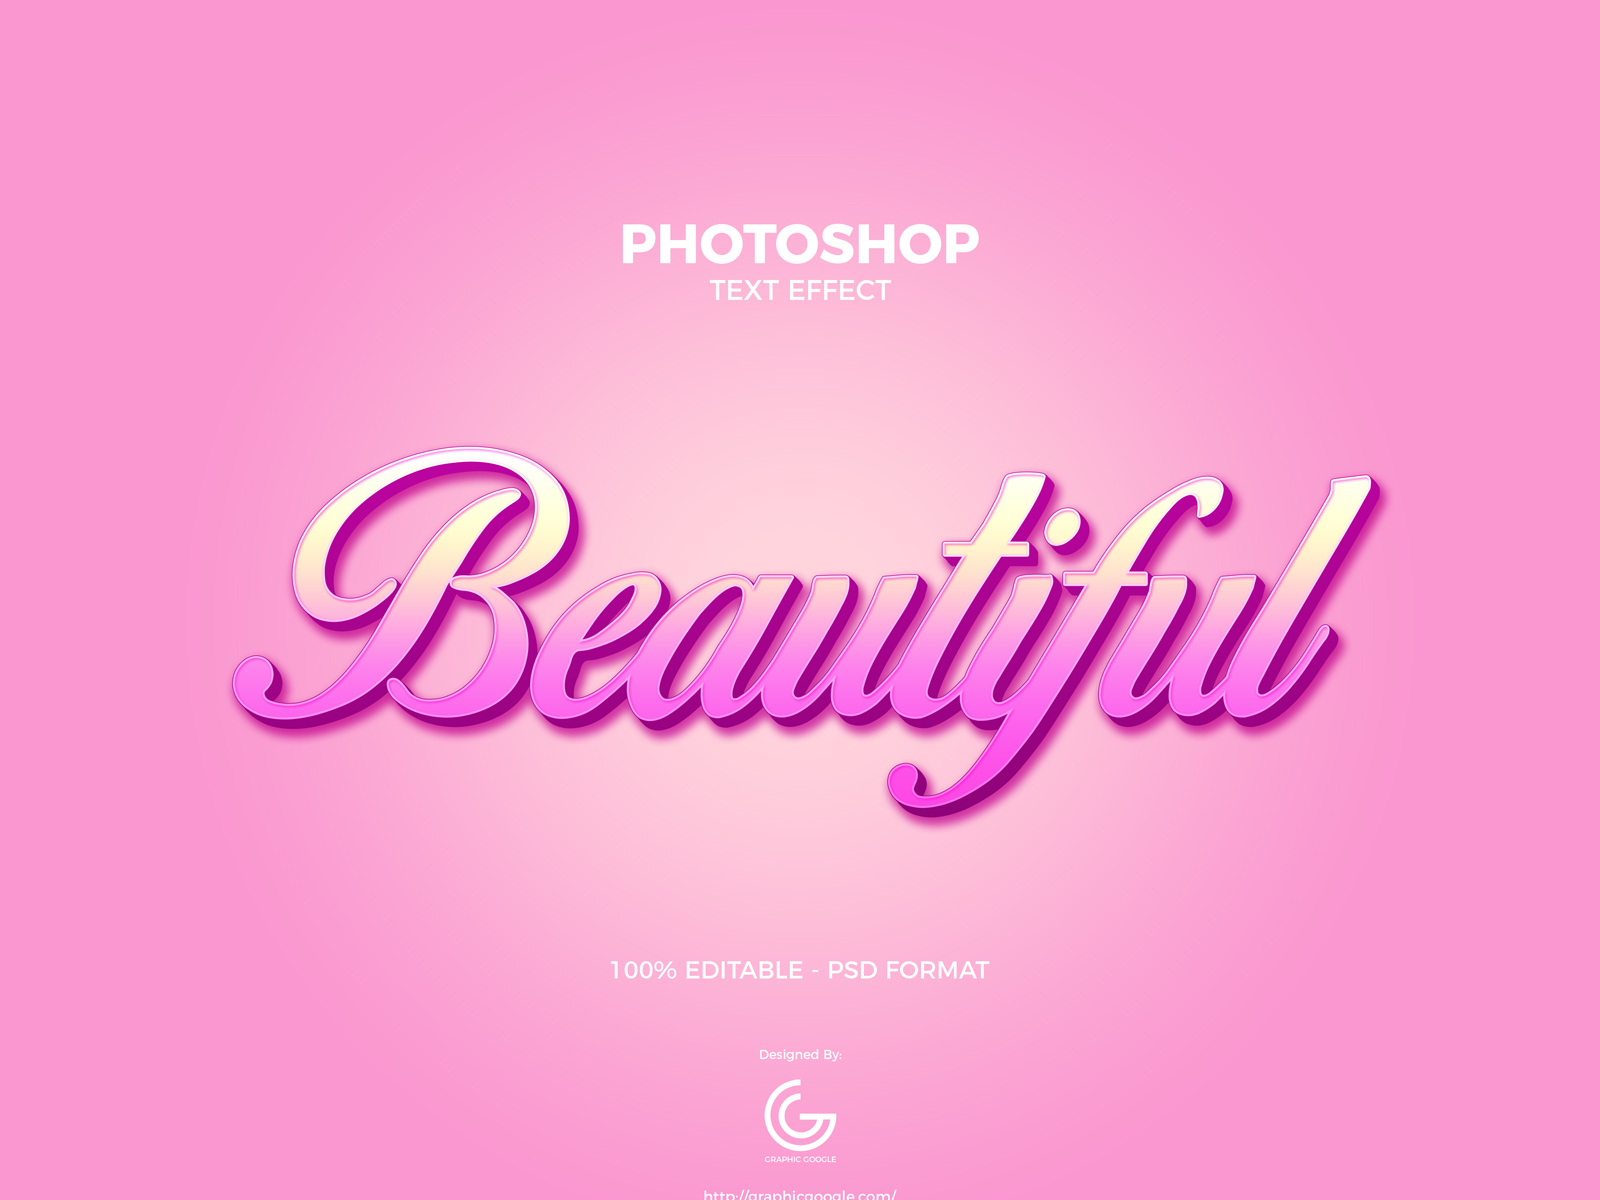 photoshop text free download